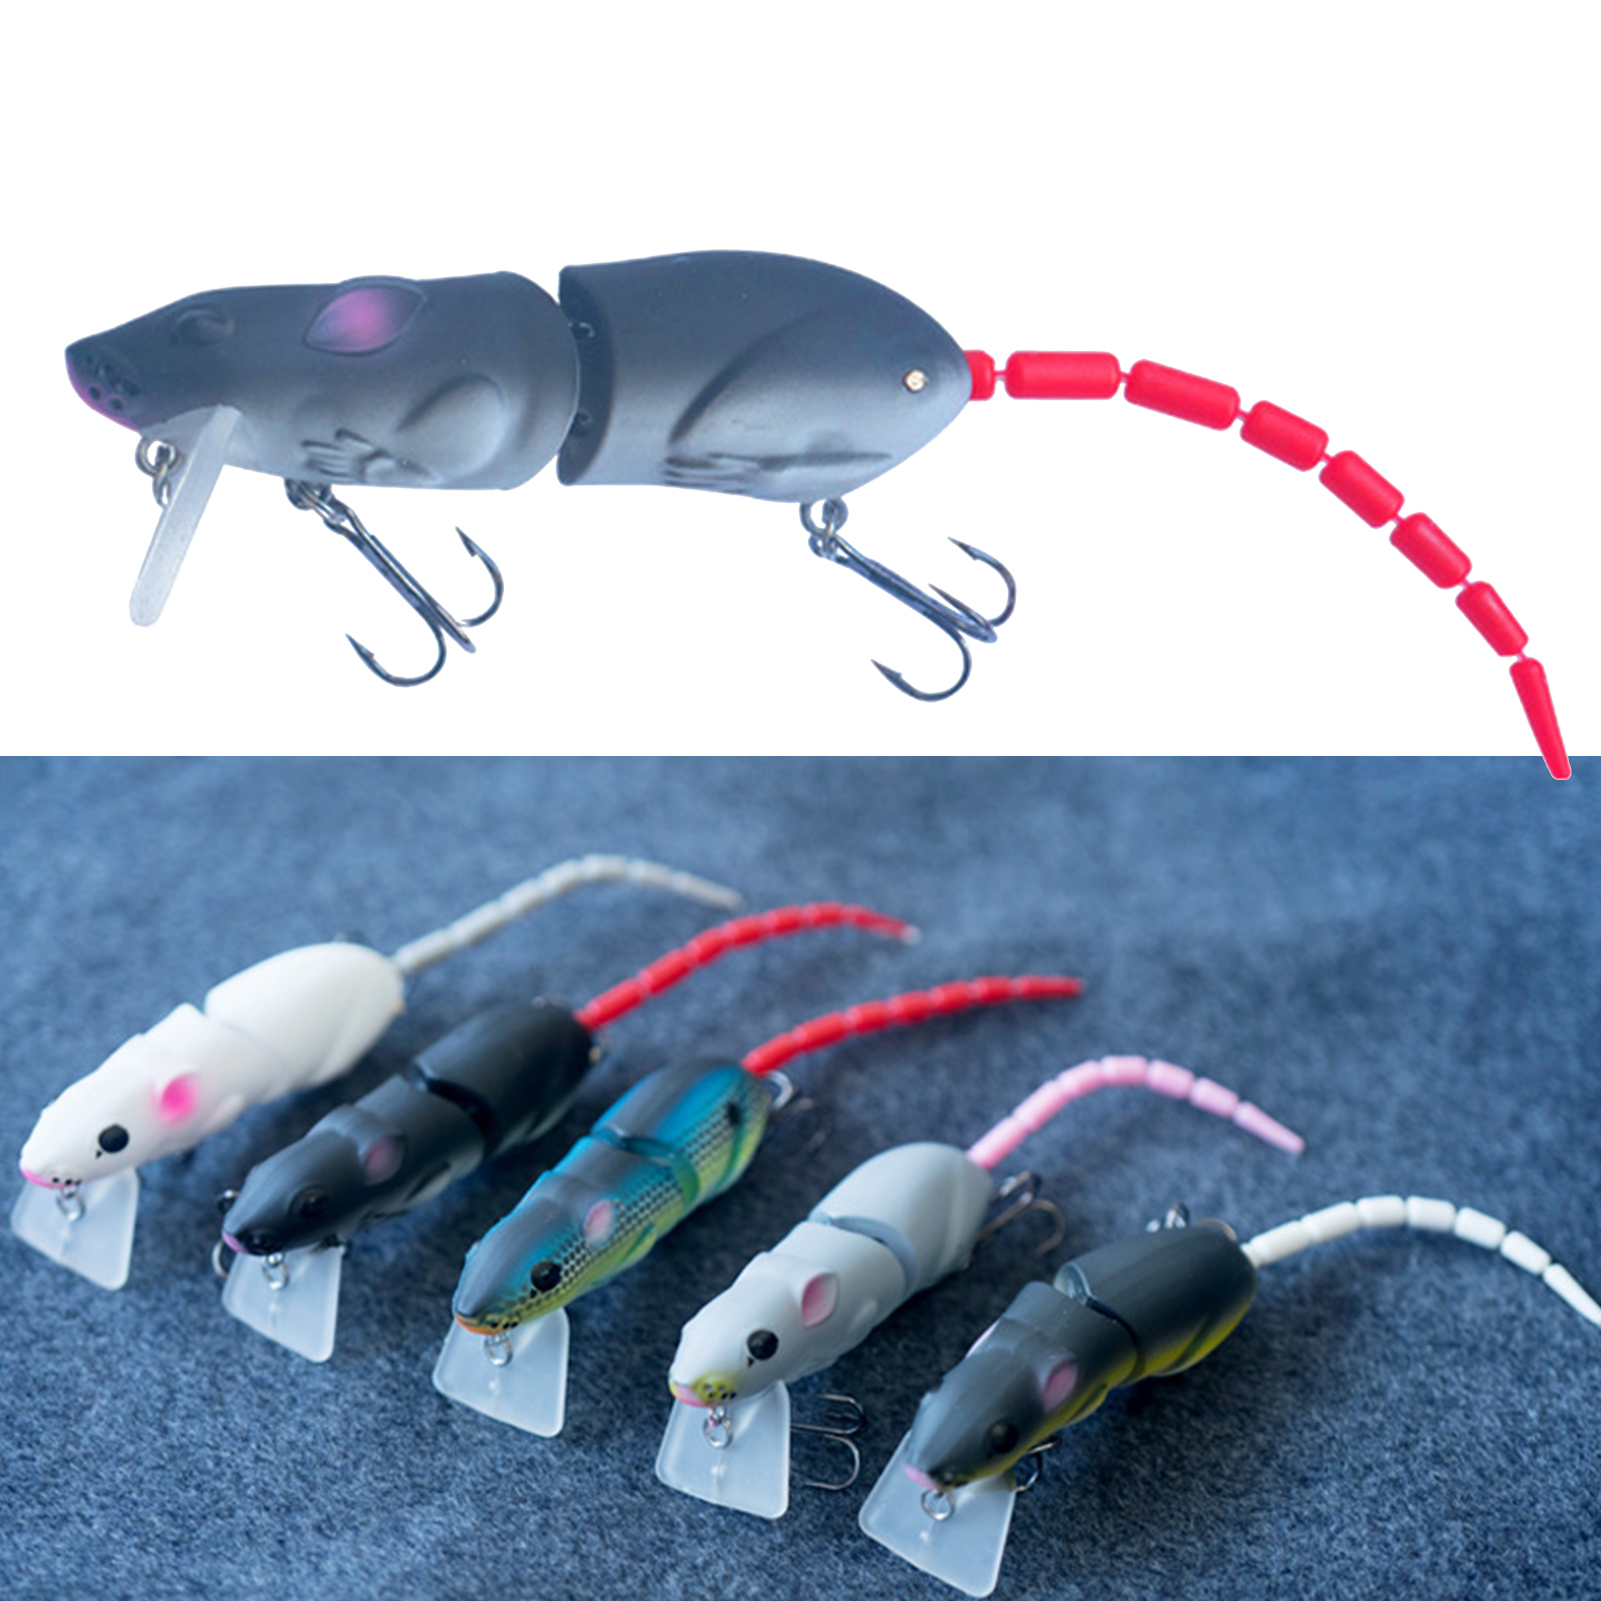 YMH 15.5g Artificial Rat Lure Vivid Wide Swing Section Design Fishing Mouse Hard Rat Bait Crankbait for Outdoor - image 3 of 10